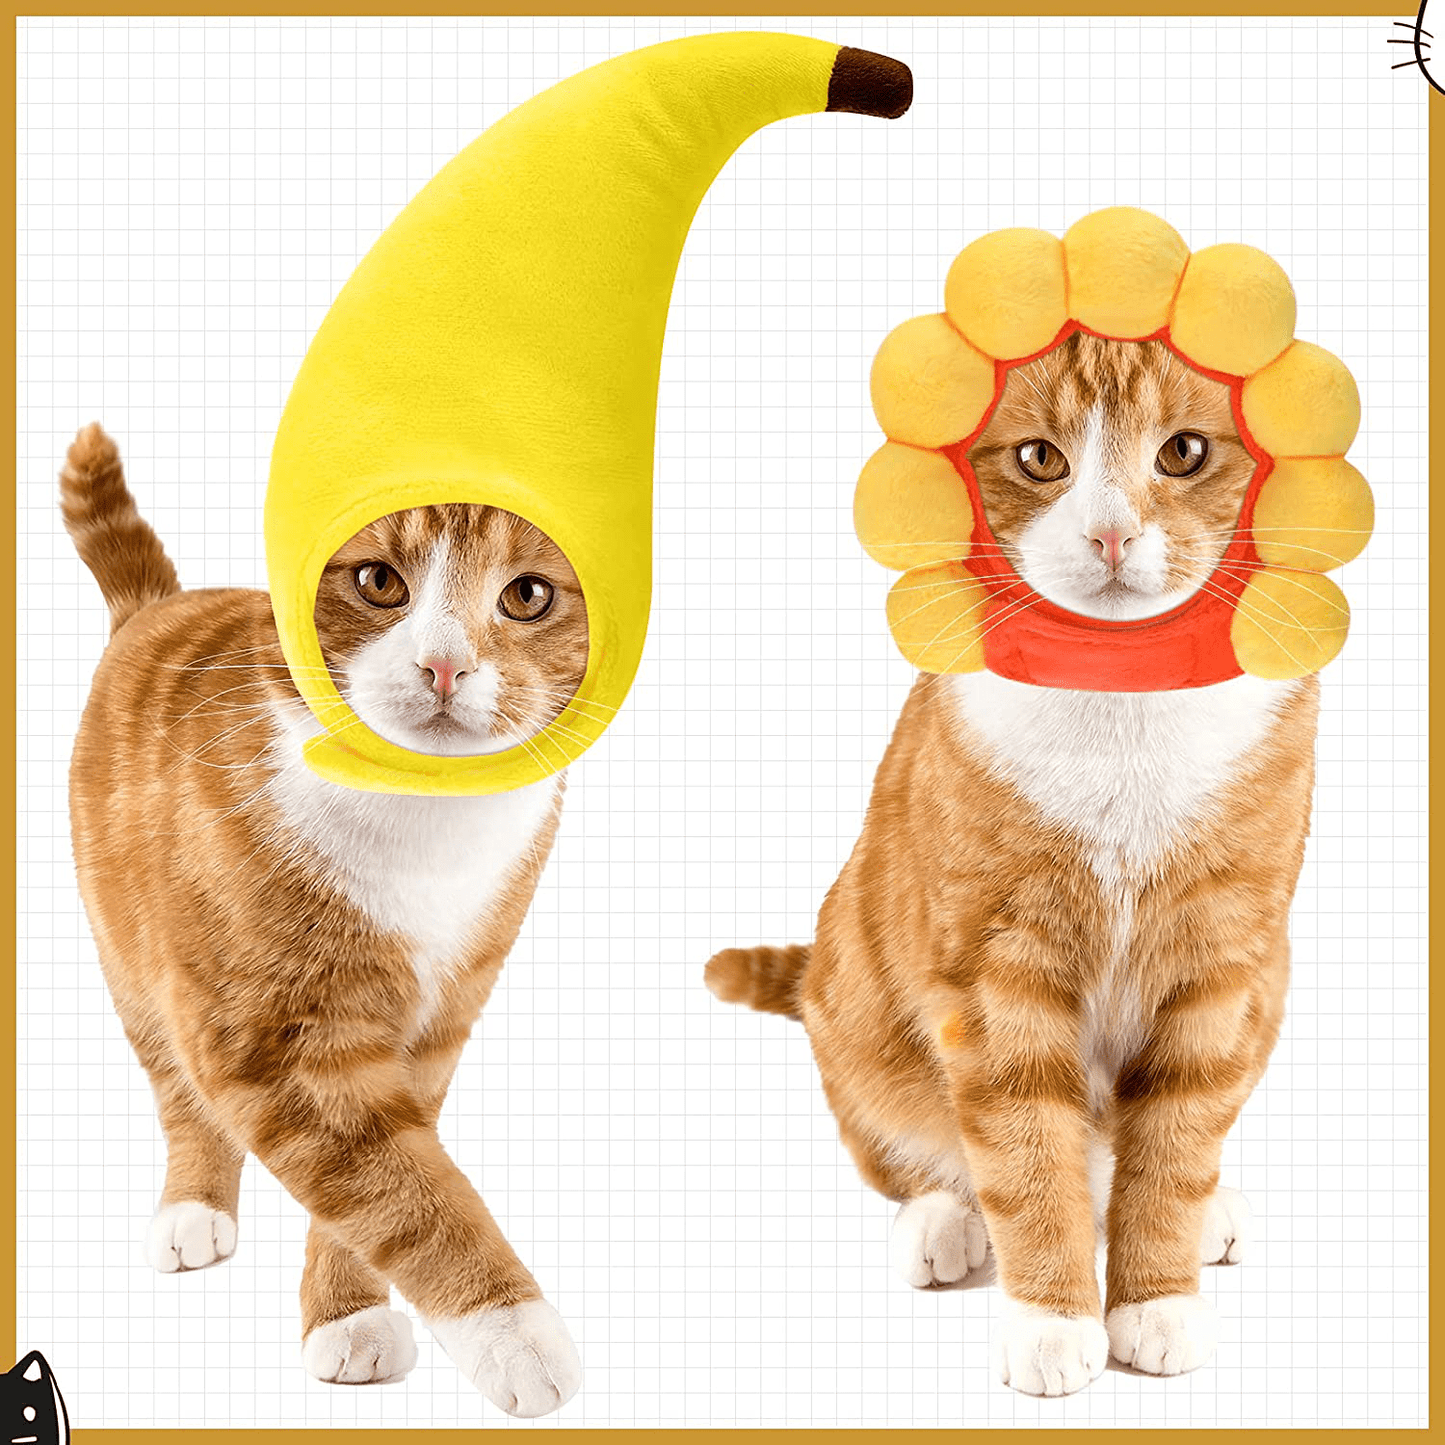 5 Pieces Cat Hat Adorable Costume Bunny Rabbit Hat with Ears Funny Frog Lion Mane Sunflower Banana Cat Hat for Cats and Small Dogs Kitten Puppy Party Costume Halloween Accessory Headwear, 5 Styles